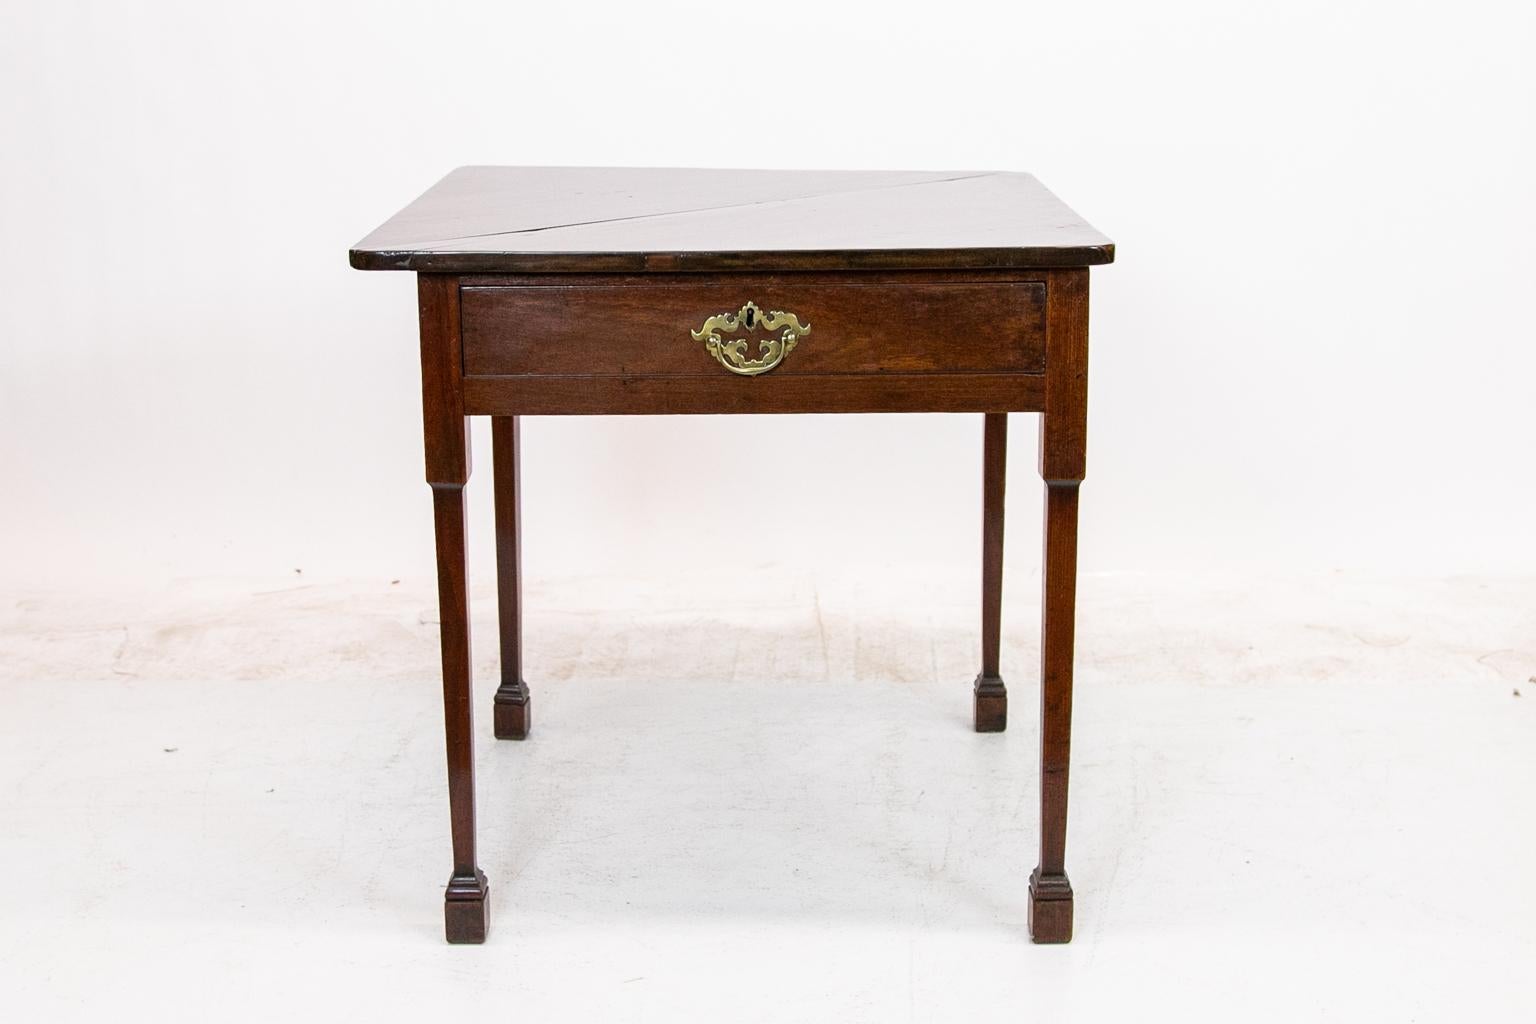 18th century rare handkerchief table has a triangular drop leaf and pie shaped hinged drawer. It sits on tapered legs terminating in Marlborough feet.